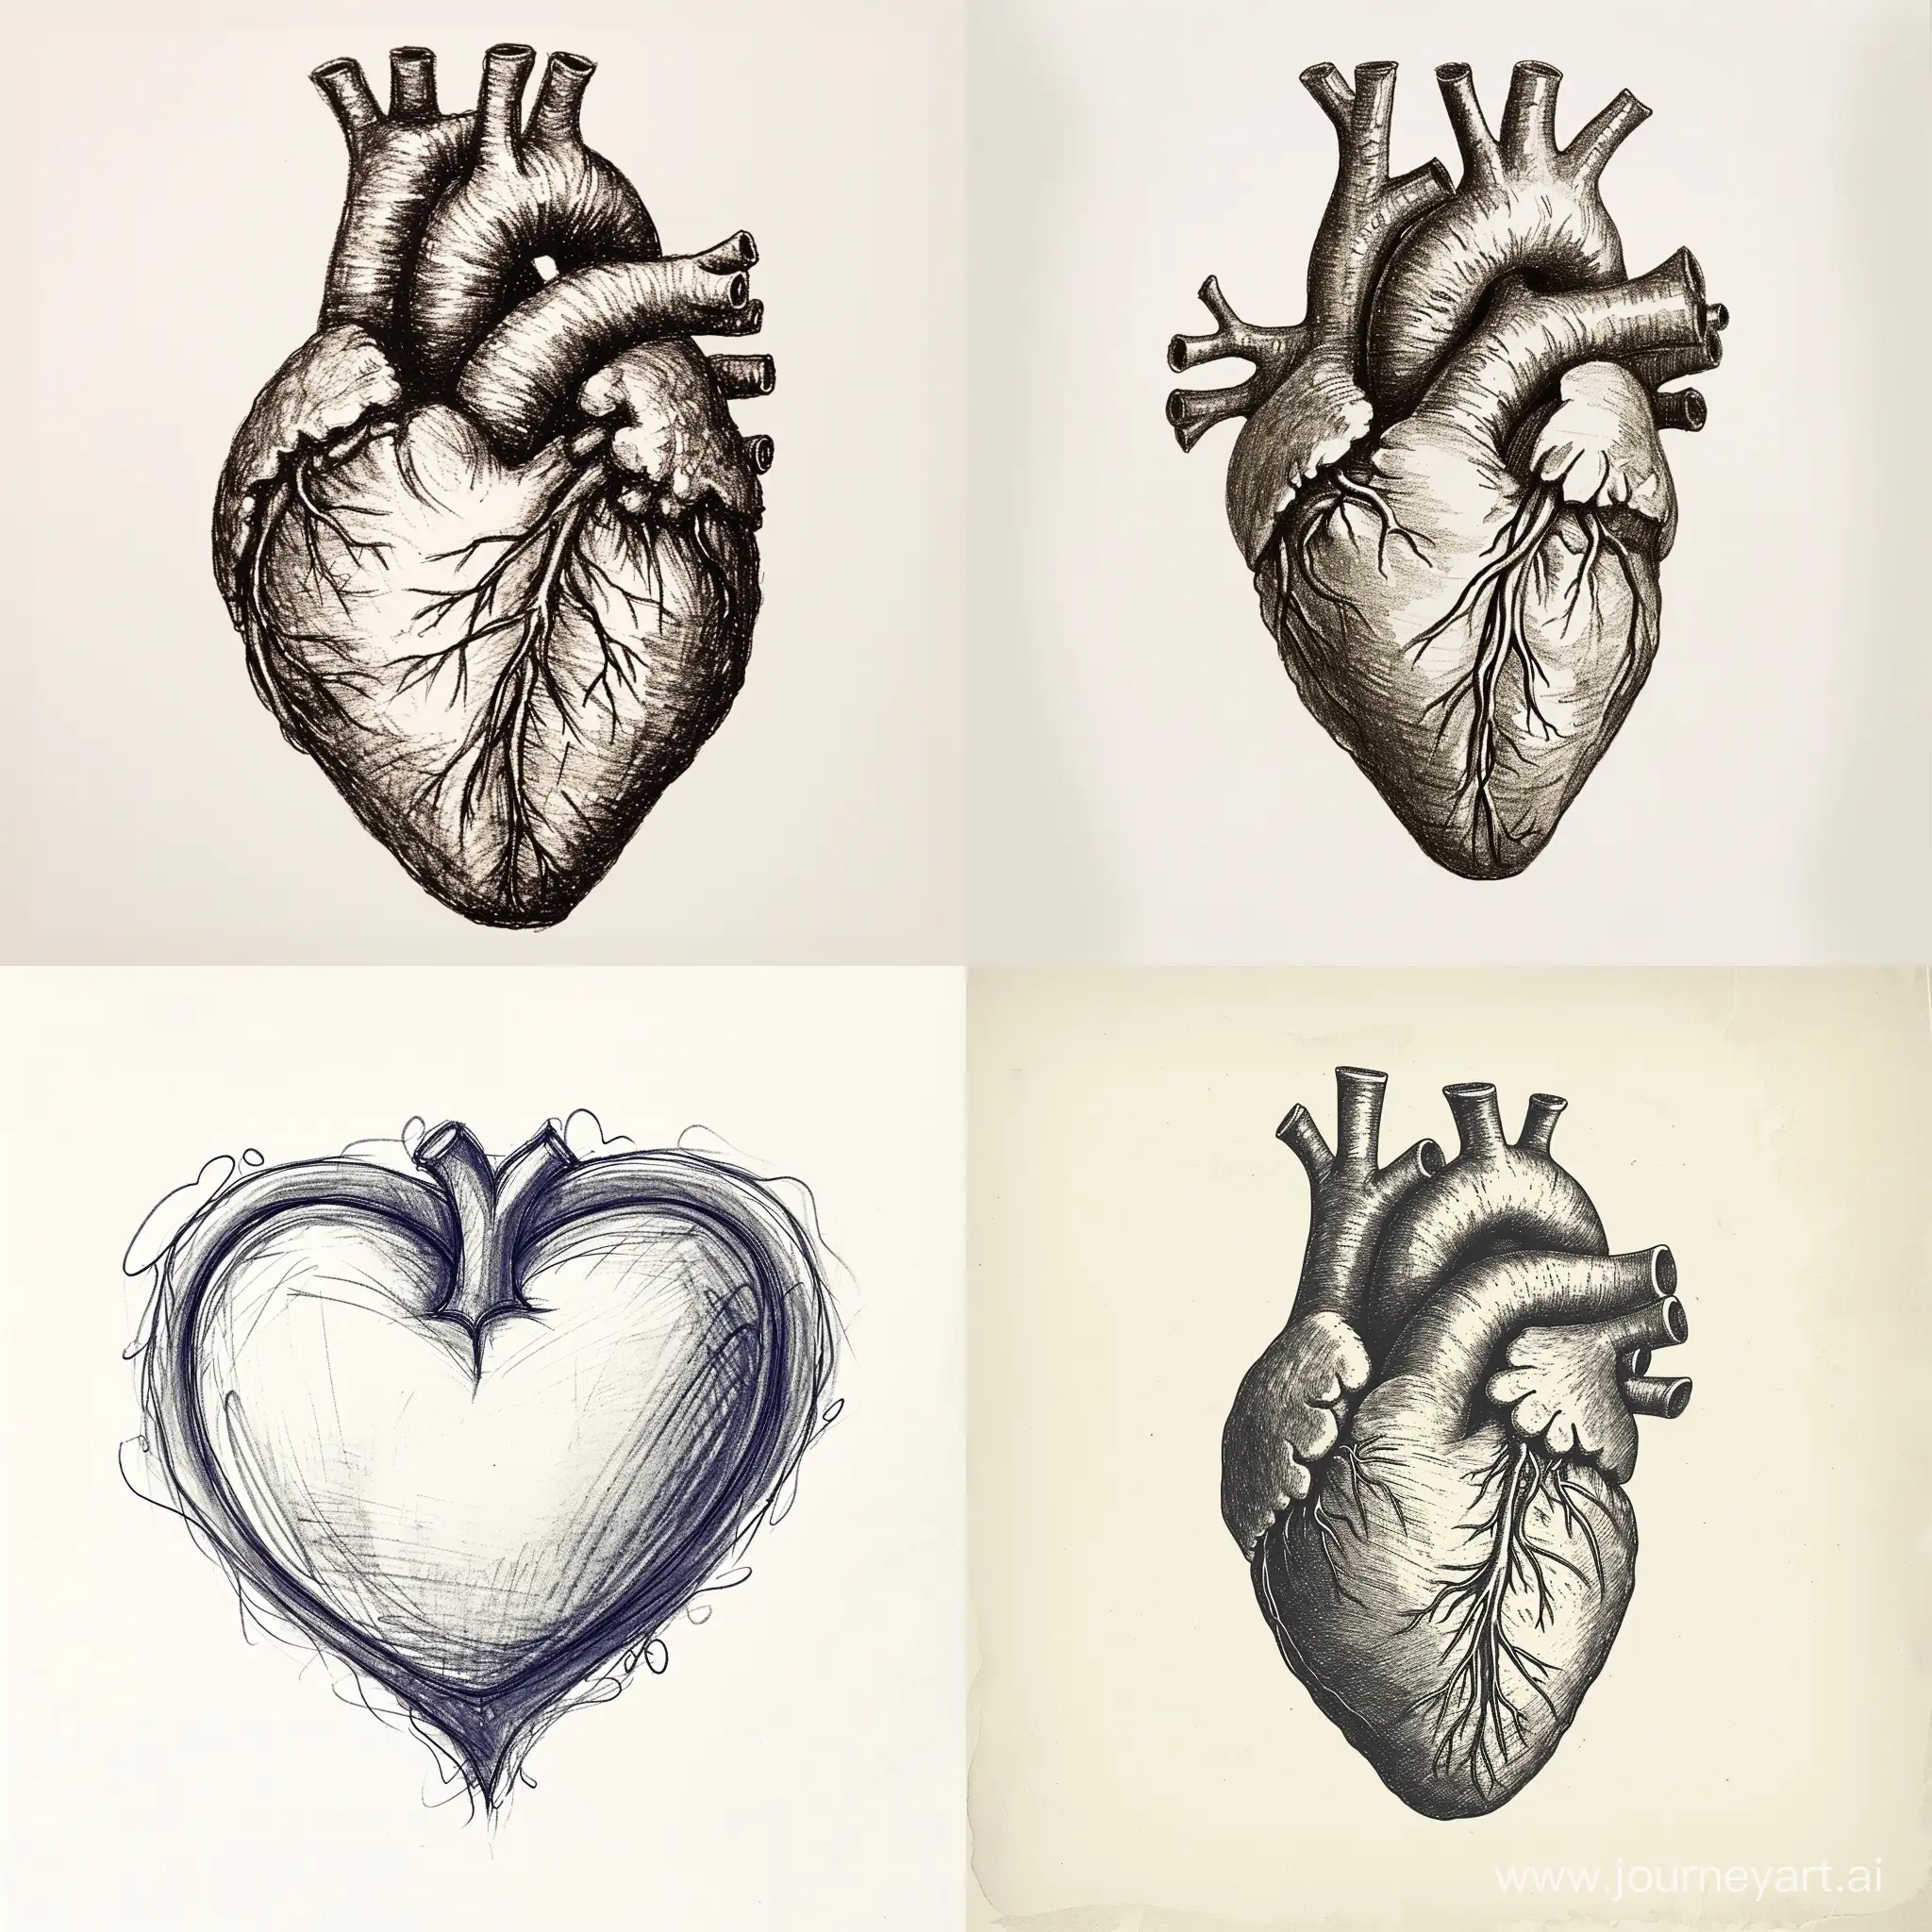 A hand drawn sketch of a heart in the style of traditional techniques reimagined, sketchfab, symmetrical, precise craftsmanship